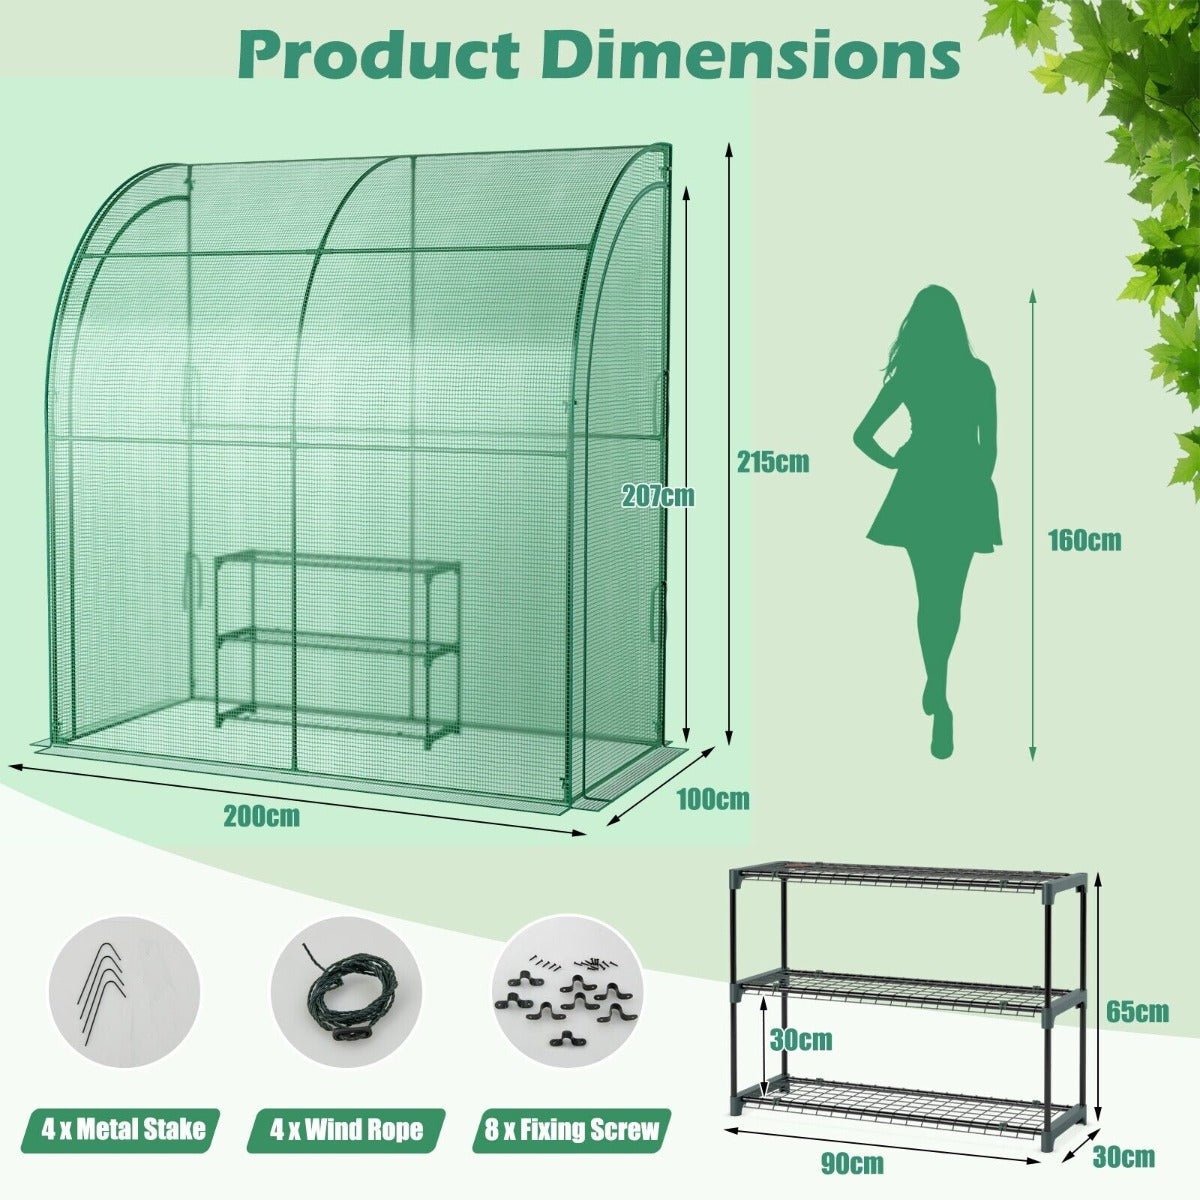 200 x 100 x 215cm Walk in Greenhouse with 3 Tier Plant Stand